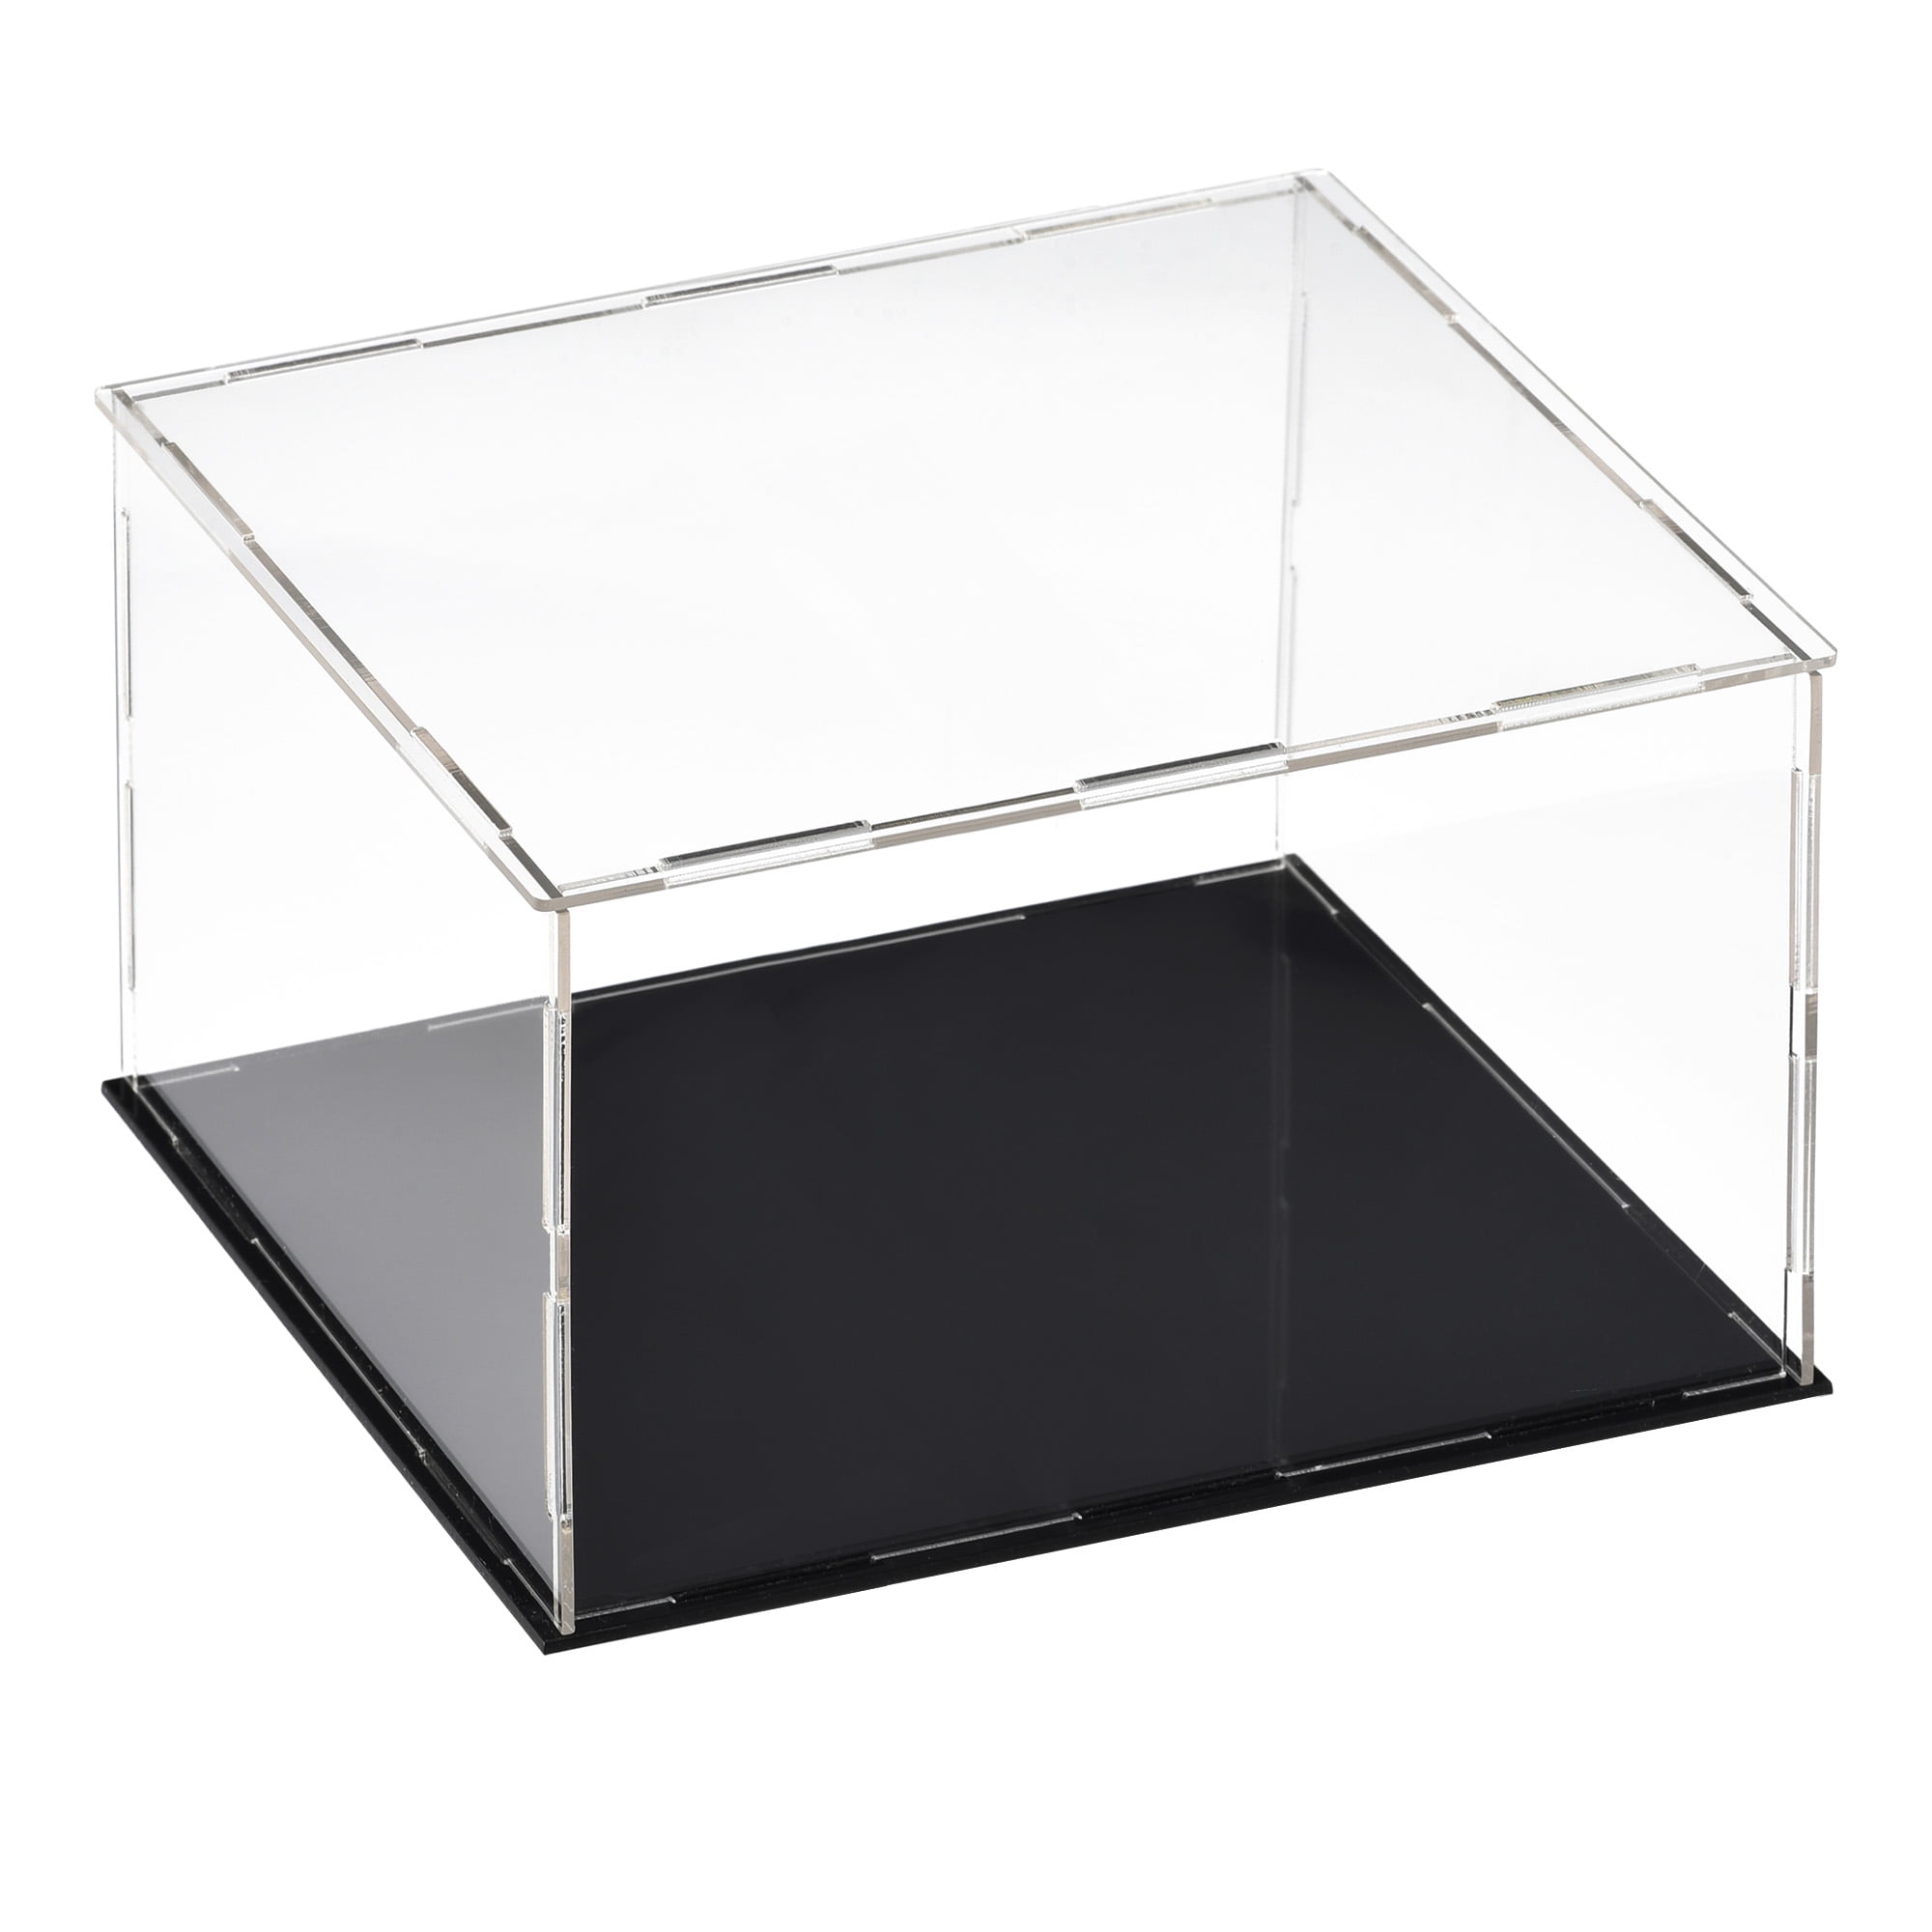 Big Clear Acrylic Display Box Case Stand Dustproof Tray Protection Cube Show 